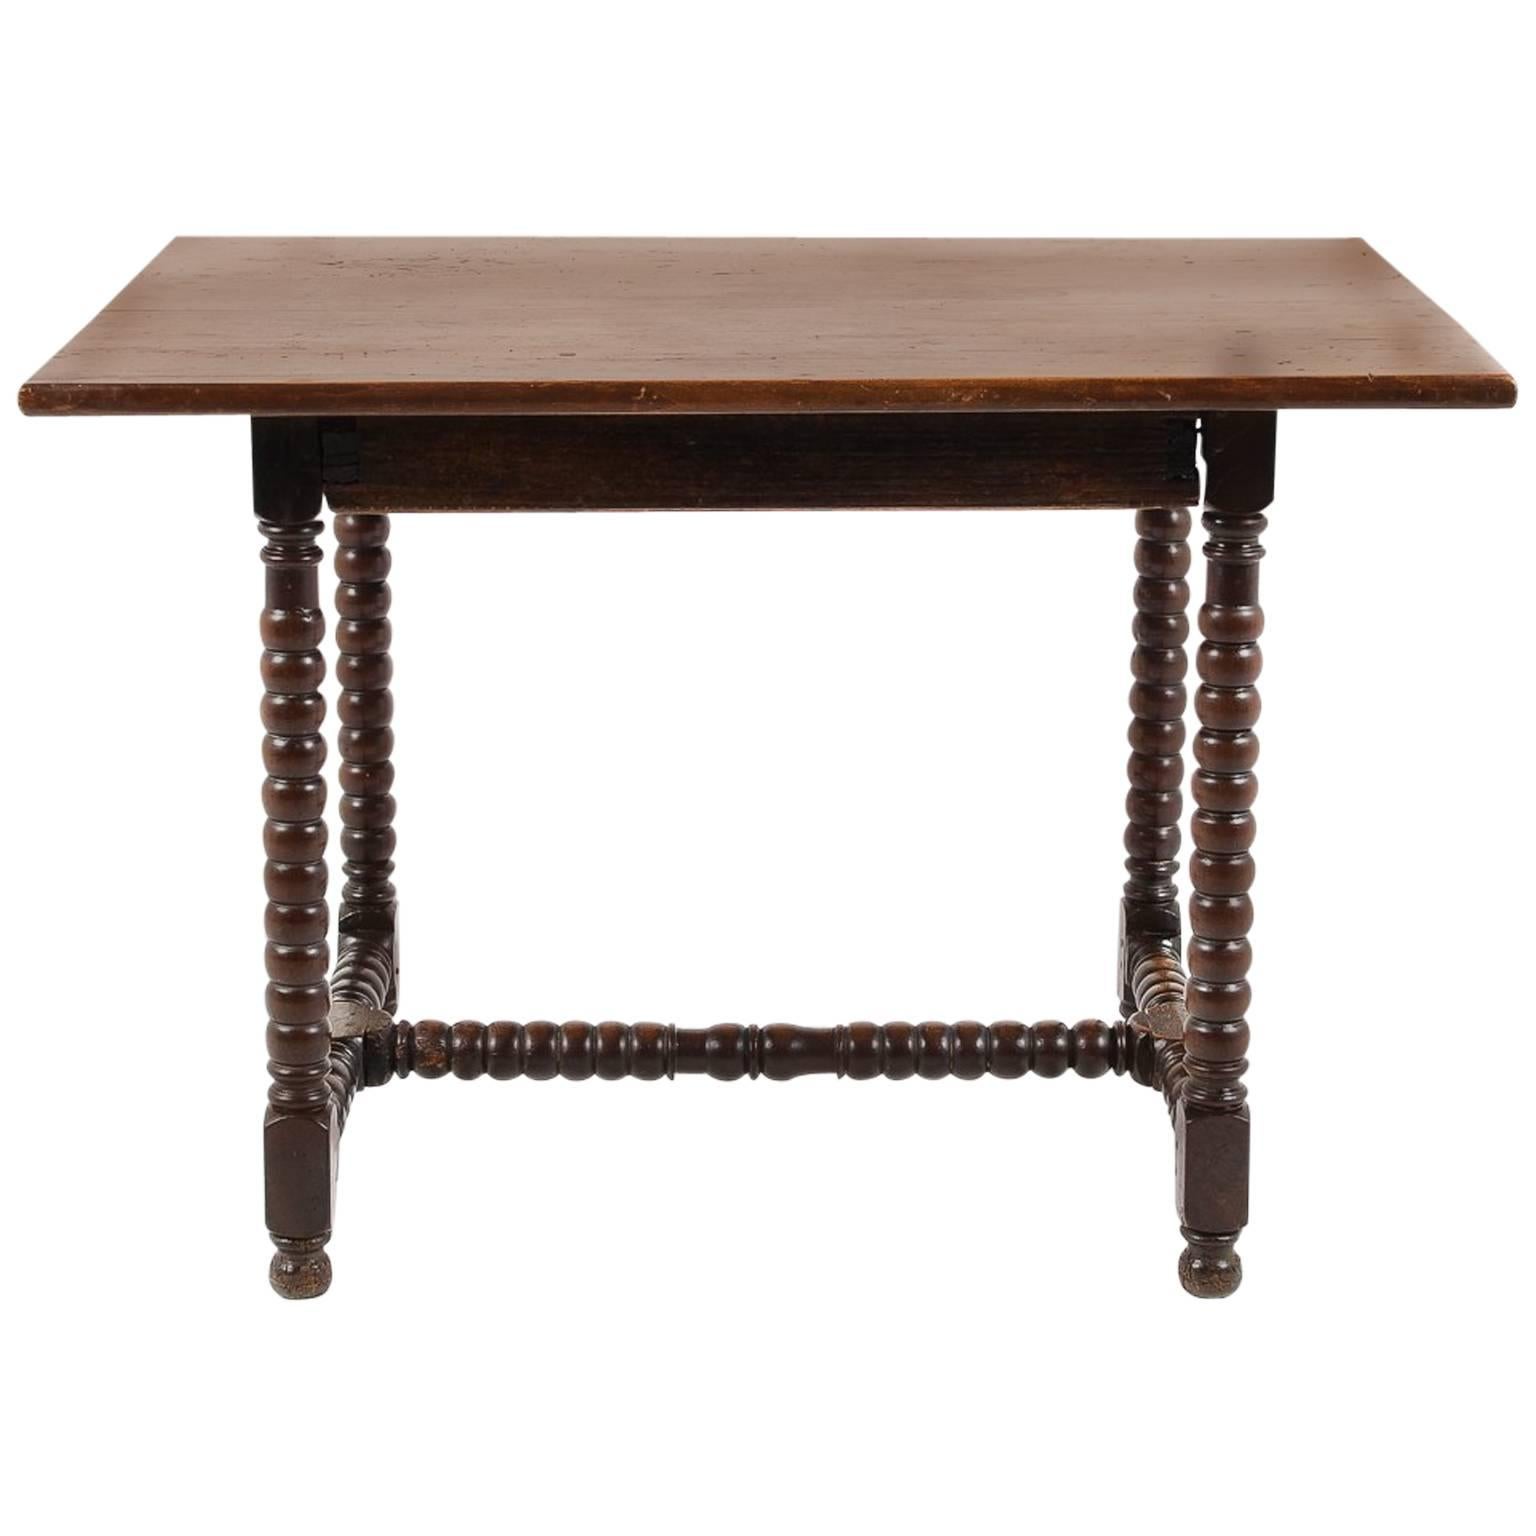 Antique Small Country French Table with ‘Bobbin Turned’ Legs, circa 1830